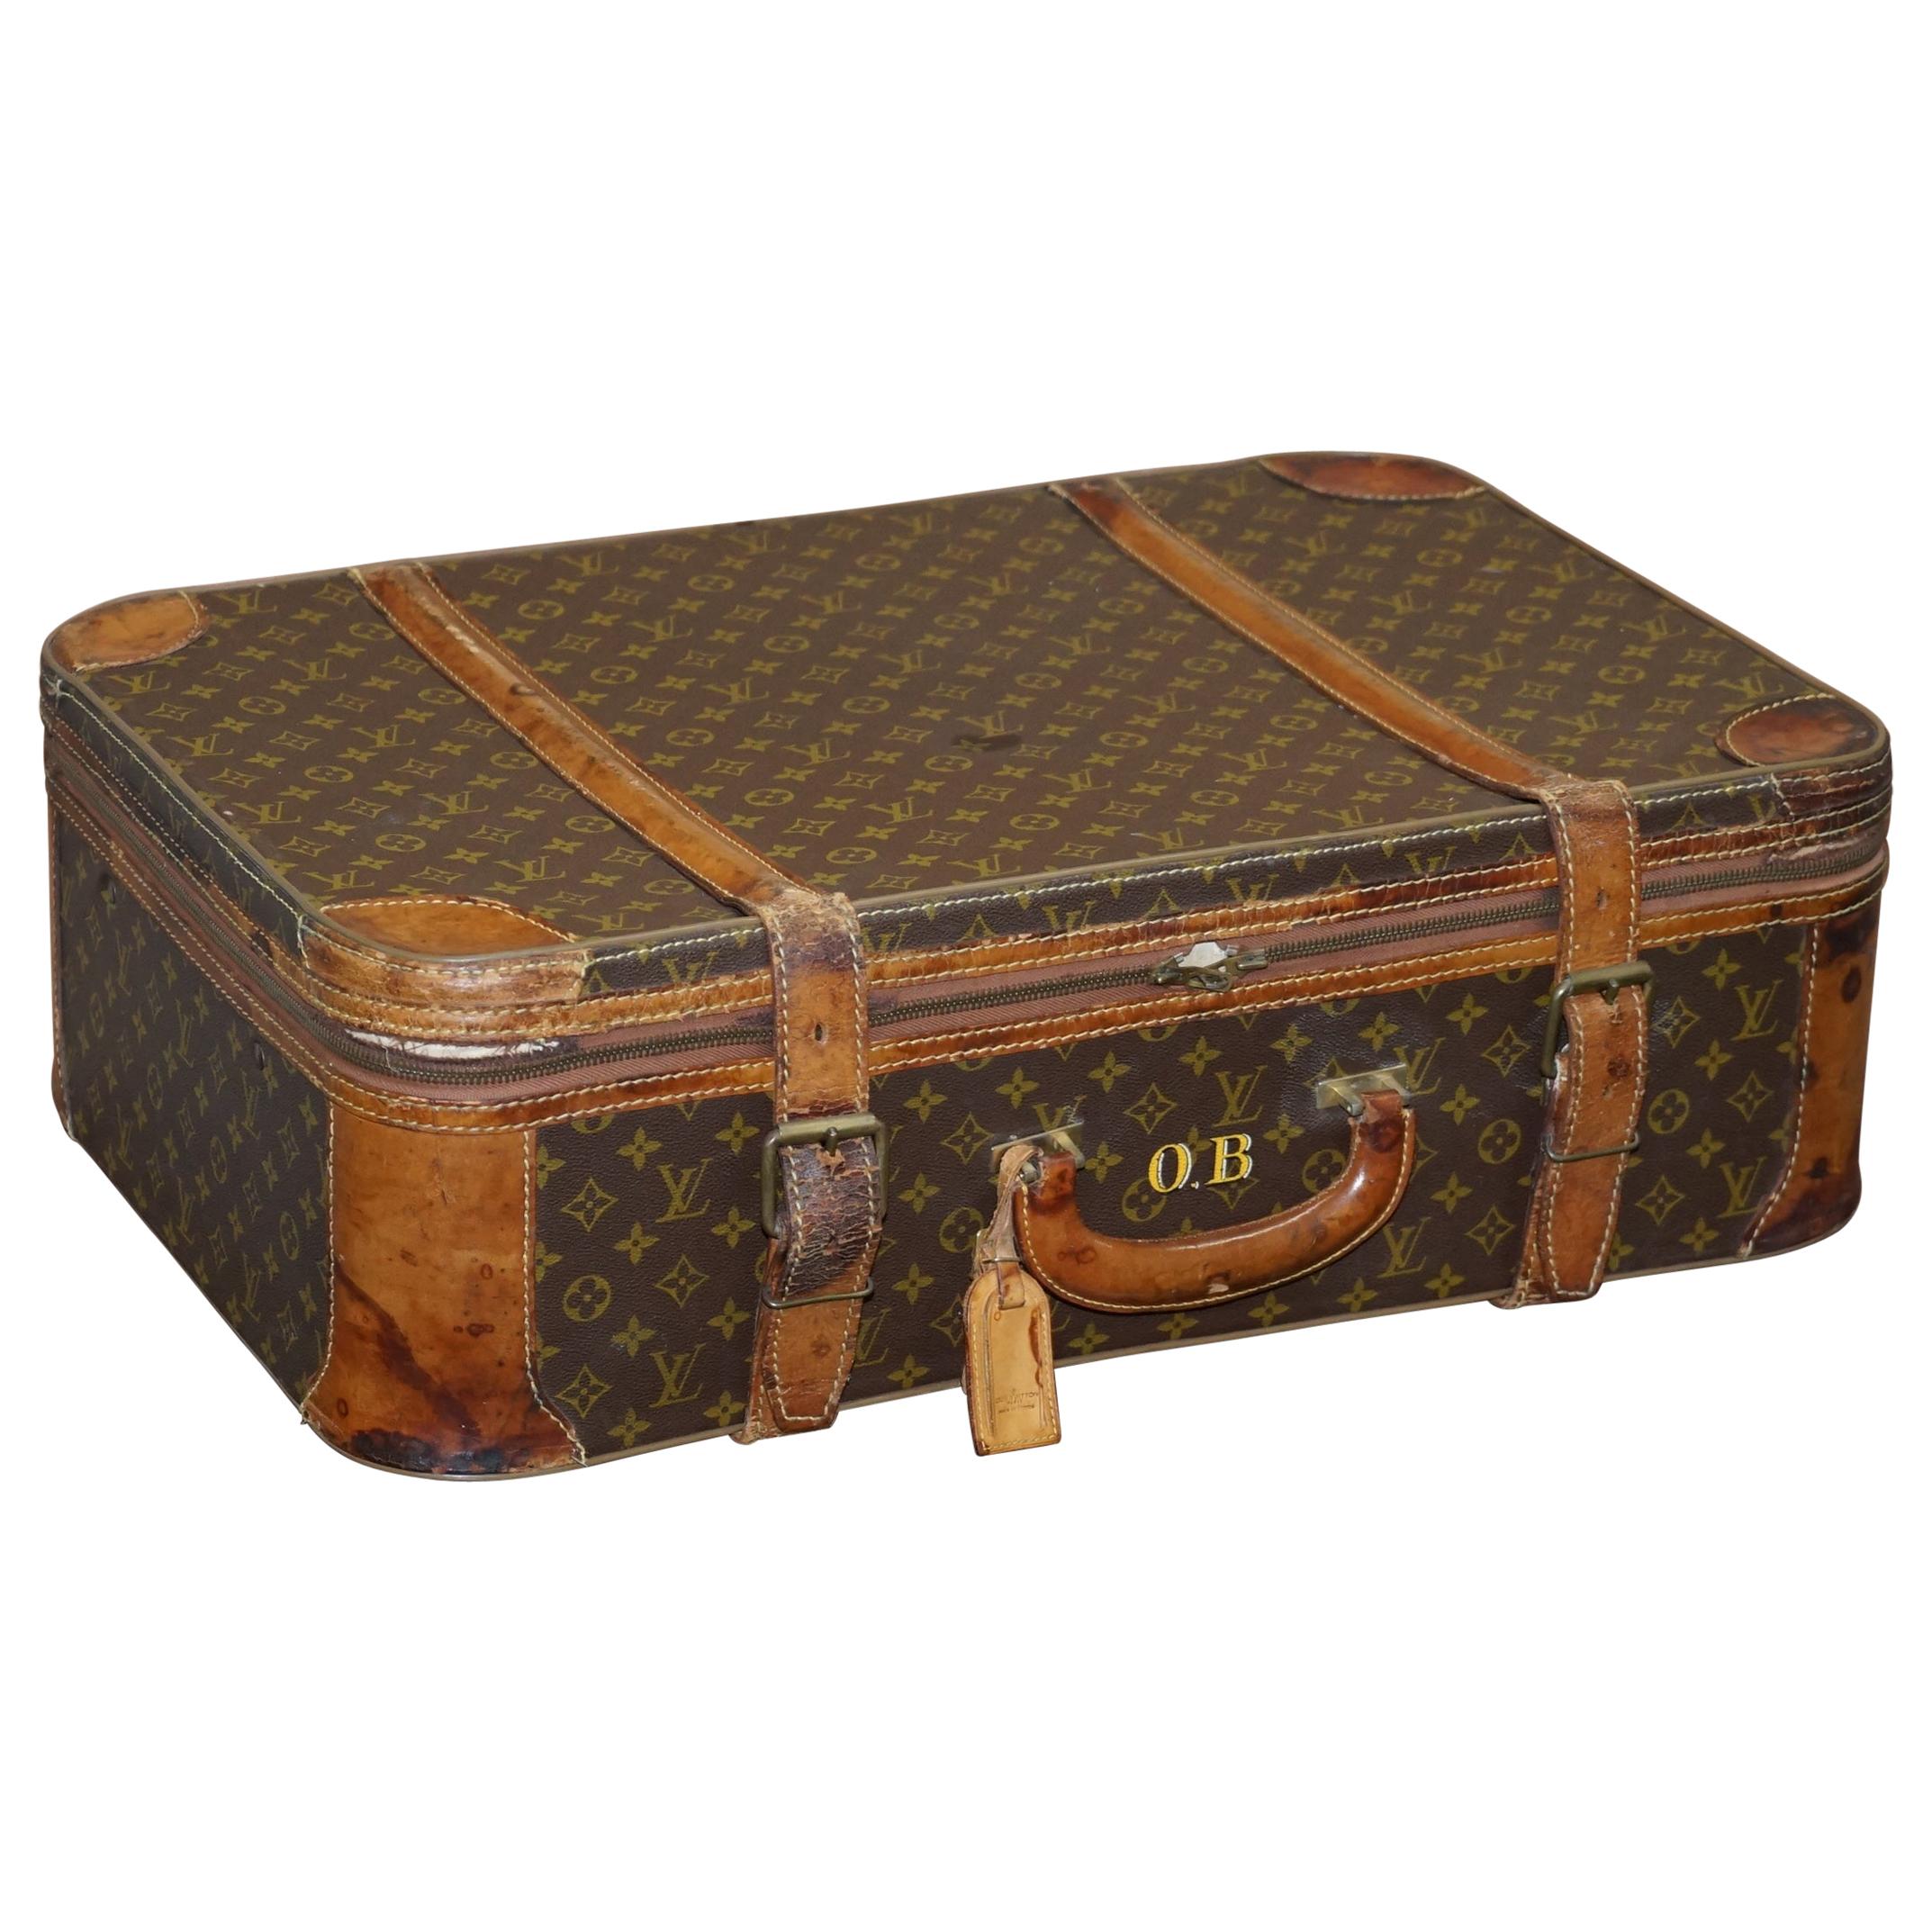 1 of 2 Vintage Brown Leather Louis Vuitton Strapped Bronze Monogram Suitcases